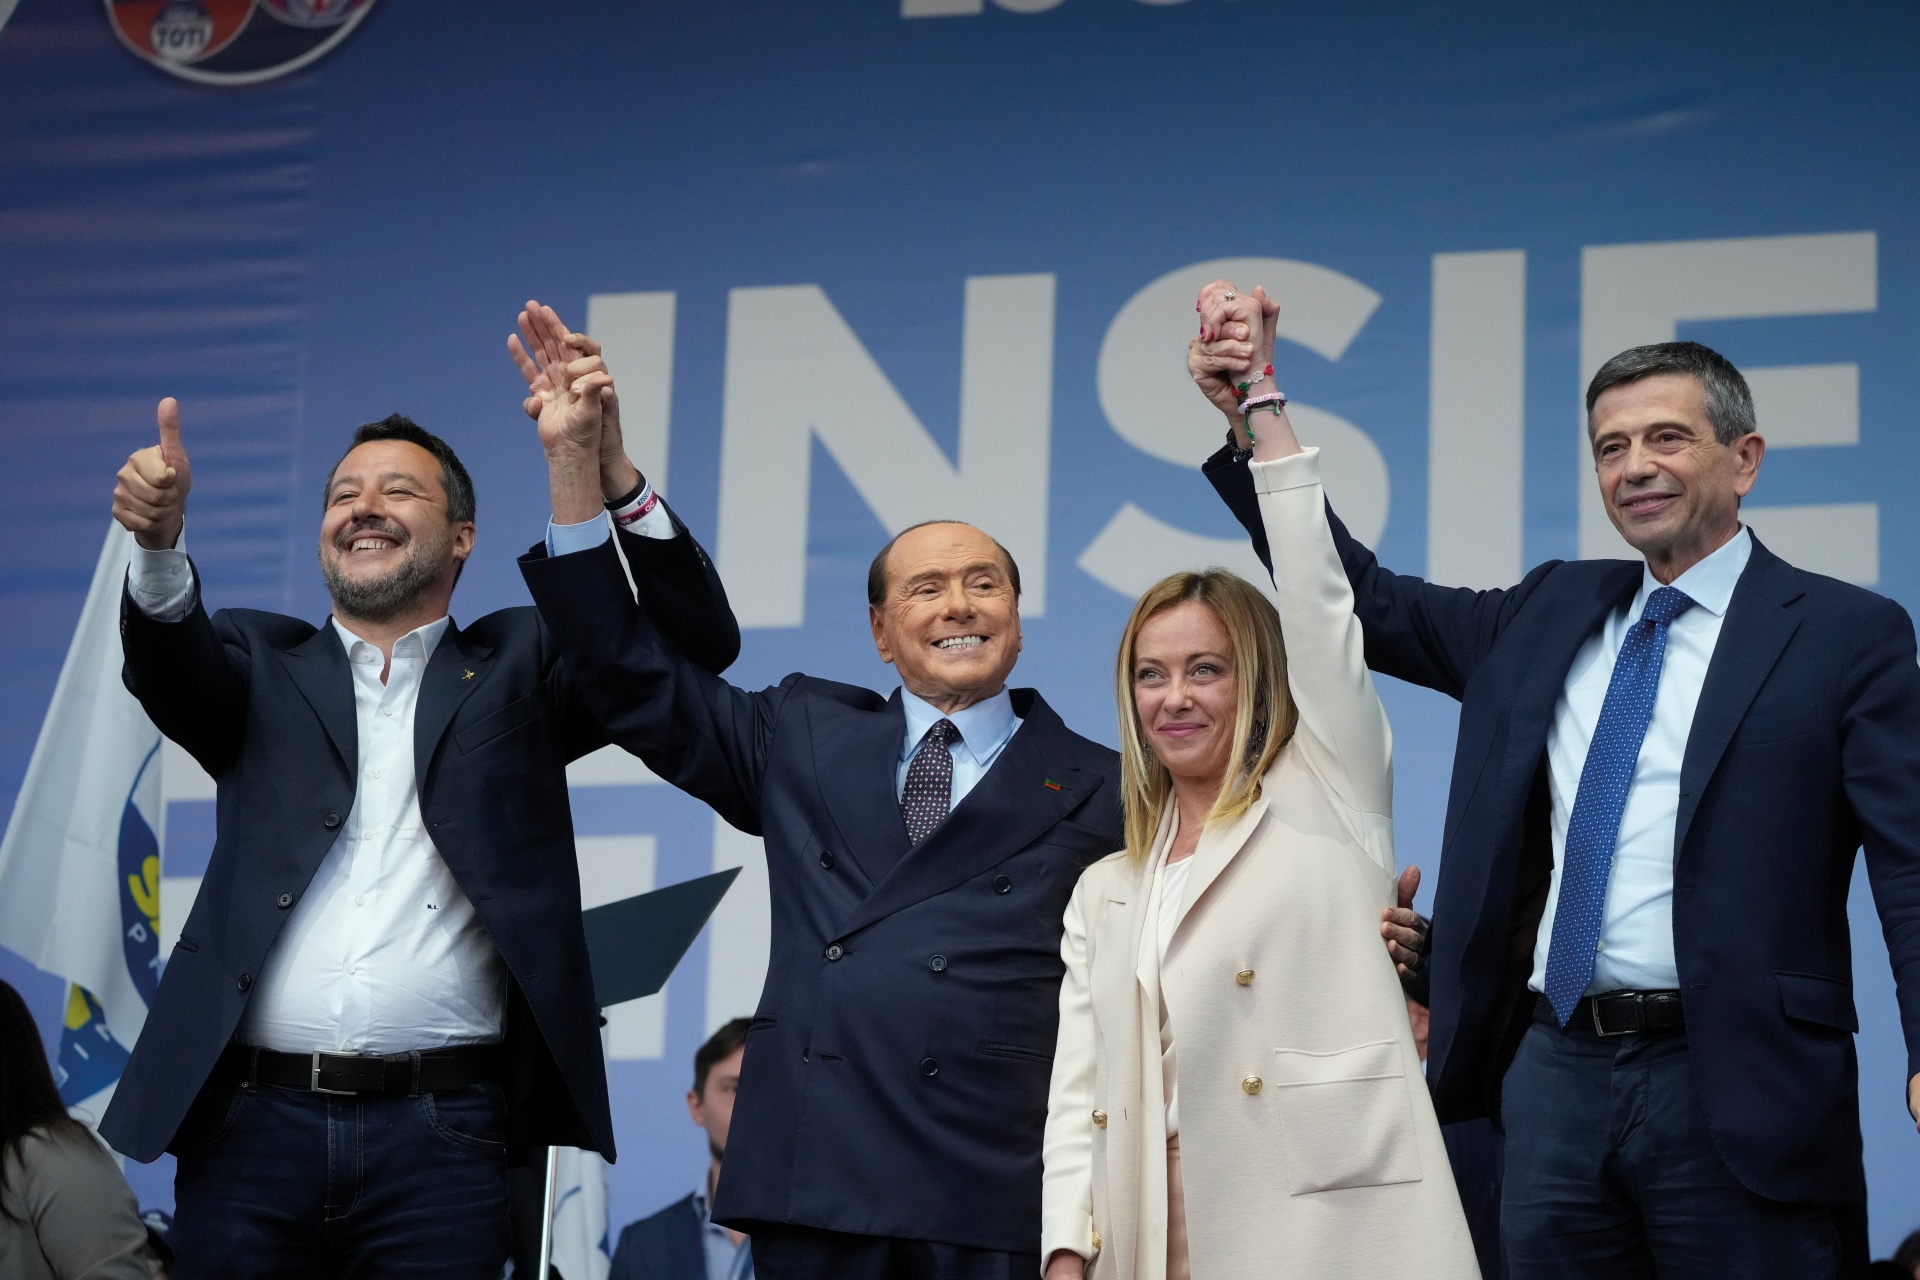  Silvio Berlusconi (centre left) welcomes Giorgia Meloni (centre right) into power, after decades of paving the way for the far-right's return to power in Italy